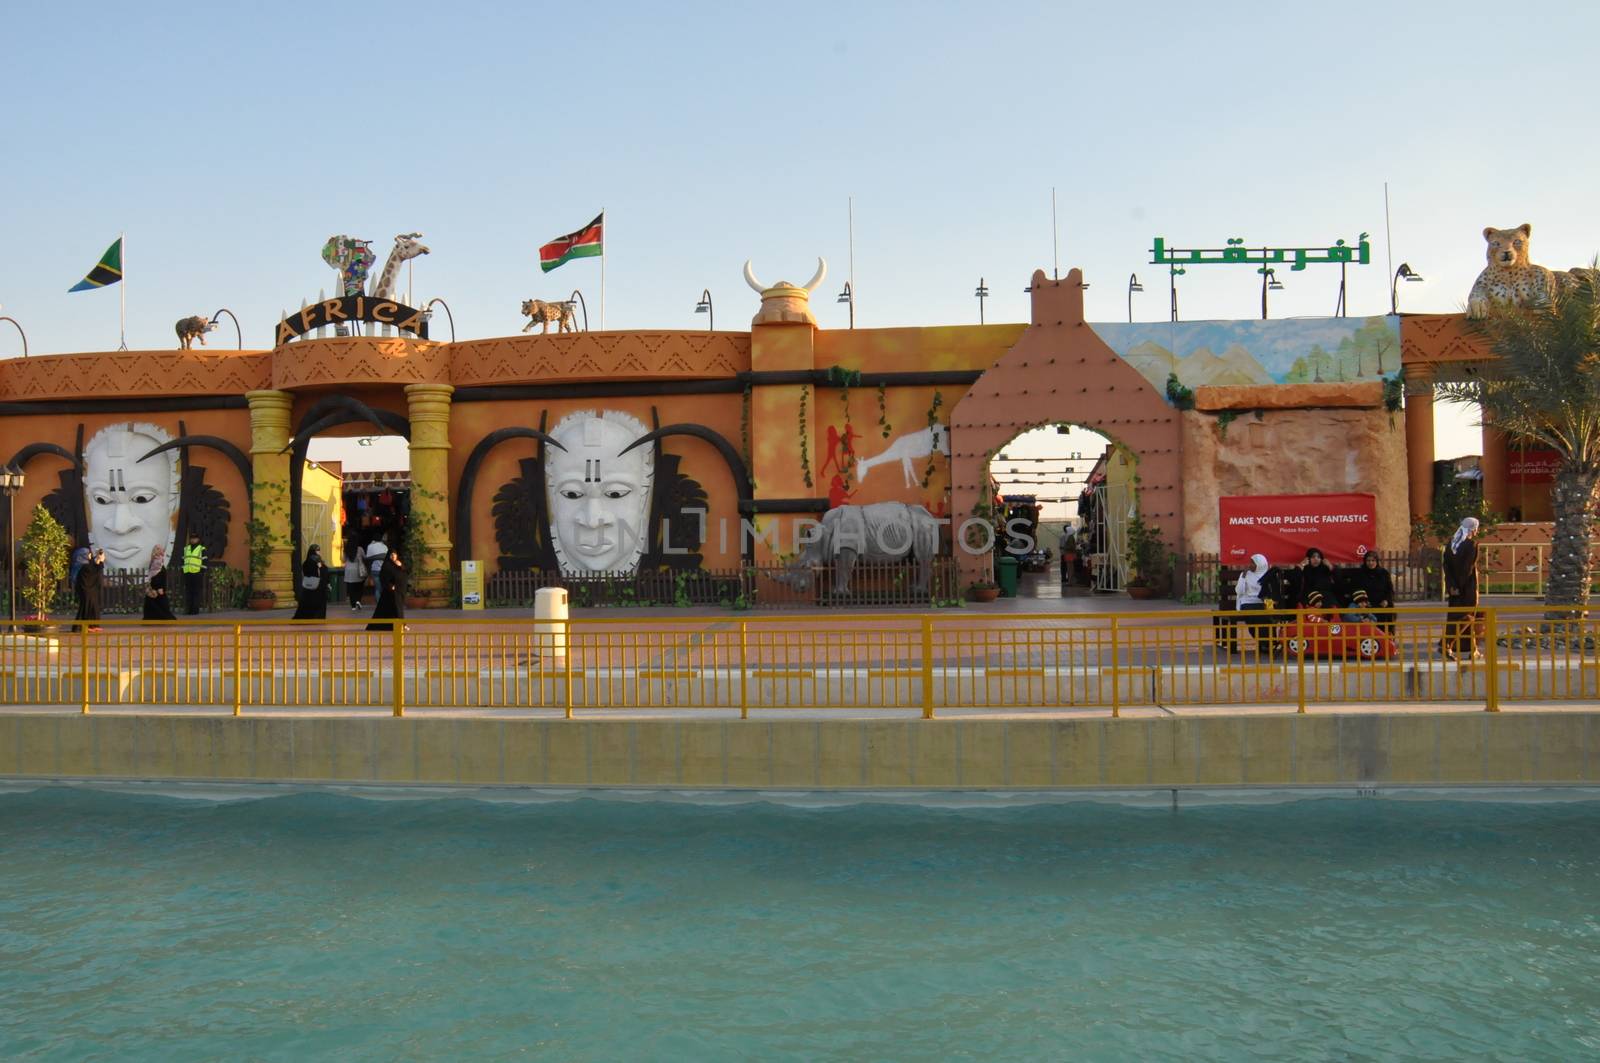 Africa pavilion at Global Village in Dubai, UAE. It is claimed to be the world's largest tourism, leisure and entertainment project.